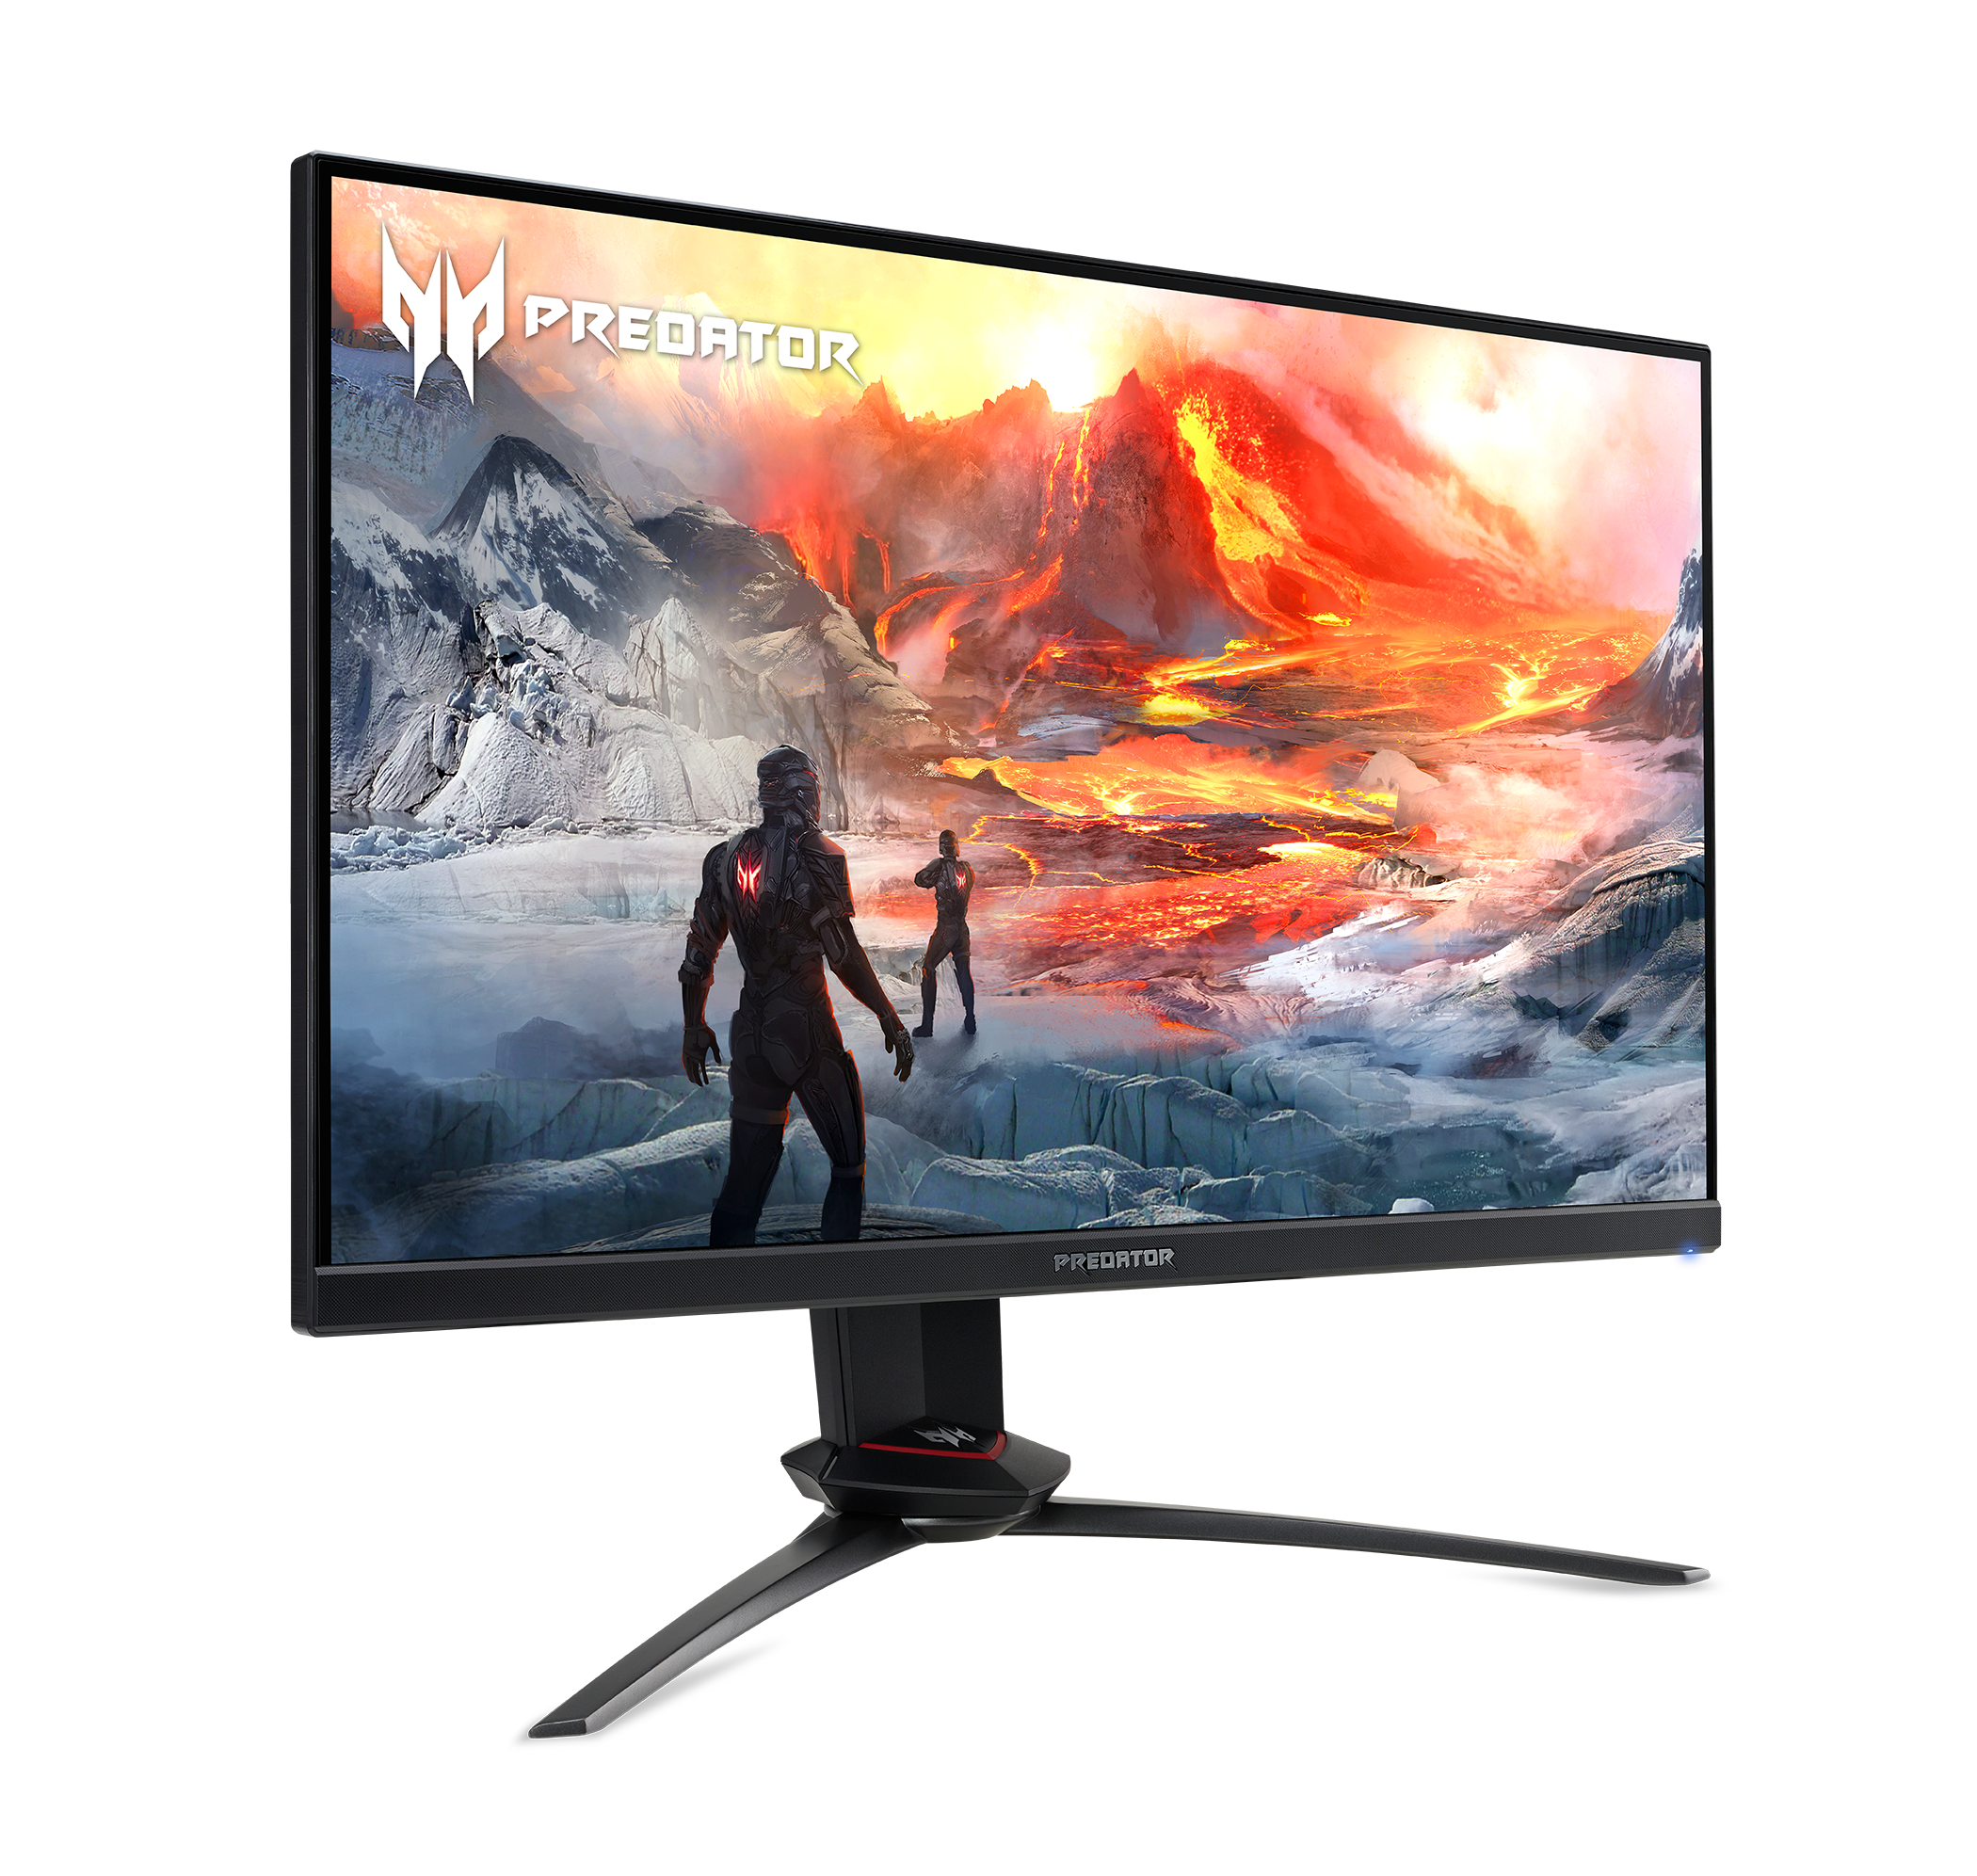 Acer Predator XB273 GZbmiiprx 27" FHD (1920 x 1080) IPS Monitor with NVIDIA G-SYNC Compatible, HDR400, Up to 0.5ms (G to G), Overclock to 280Hz  (1 x Display Port & 2 x HDMI Ports)